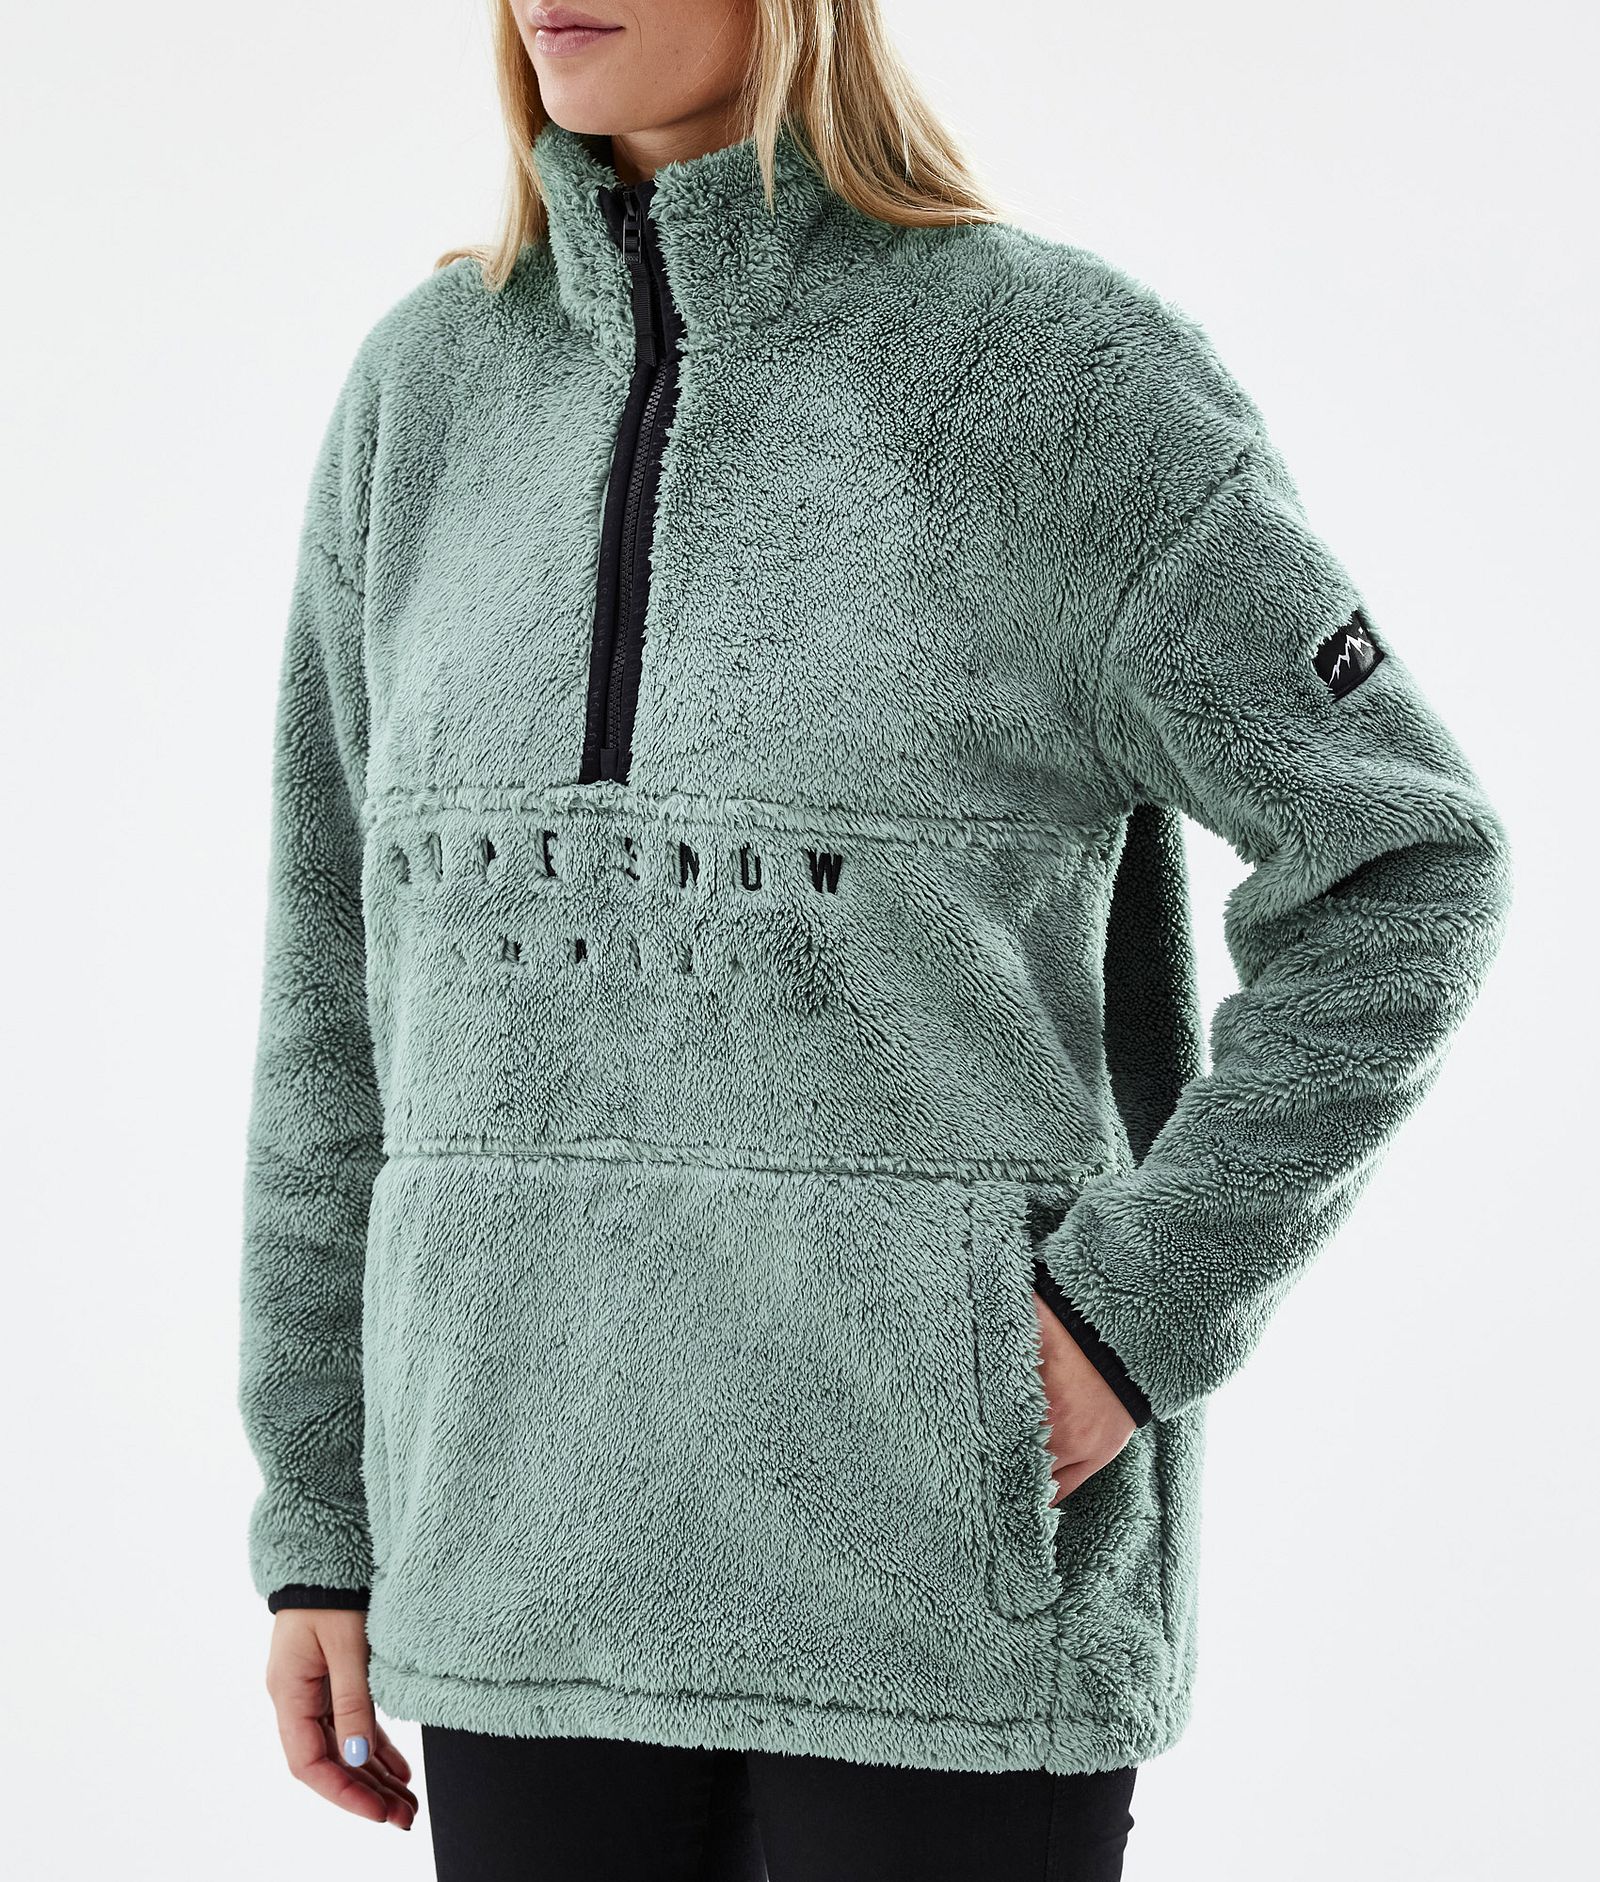 Pile W 2022 Sweat Polaire Femme Faded Green, Image 7 sur 8